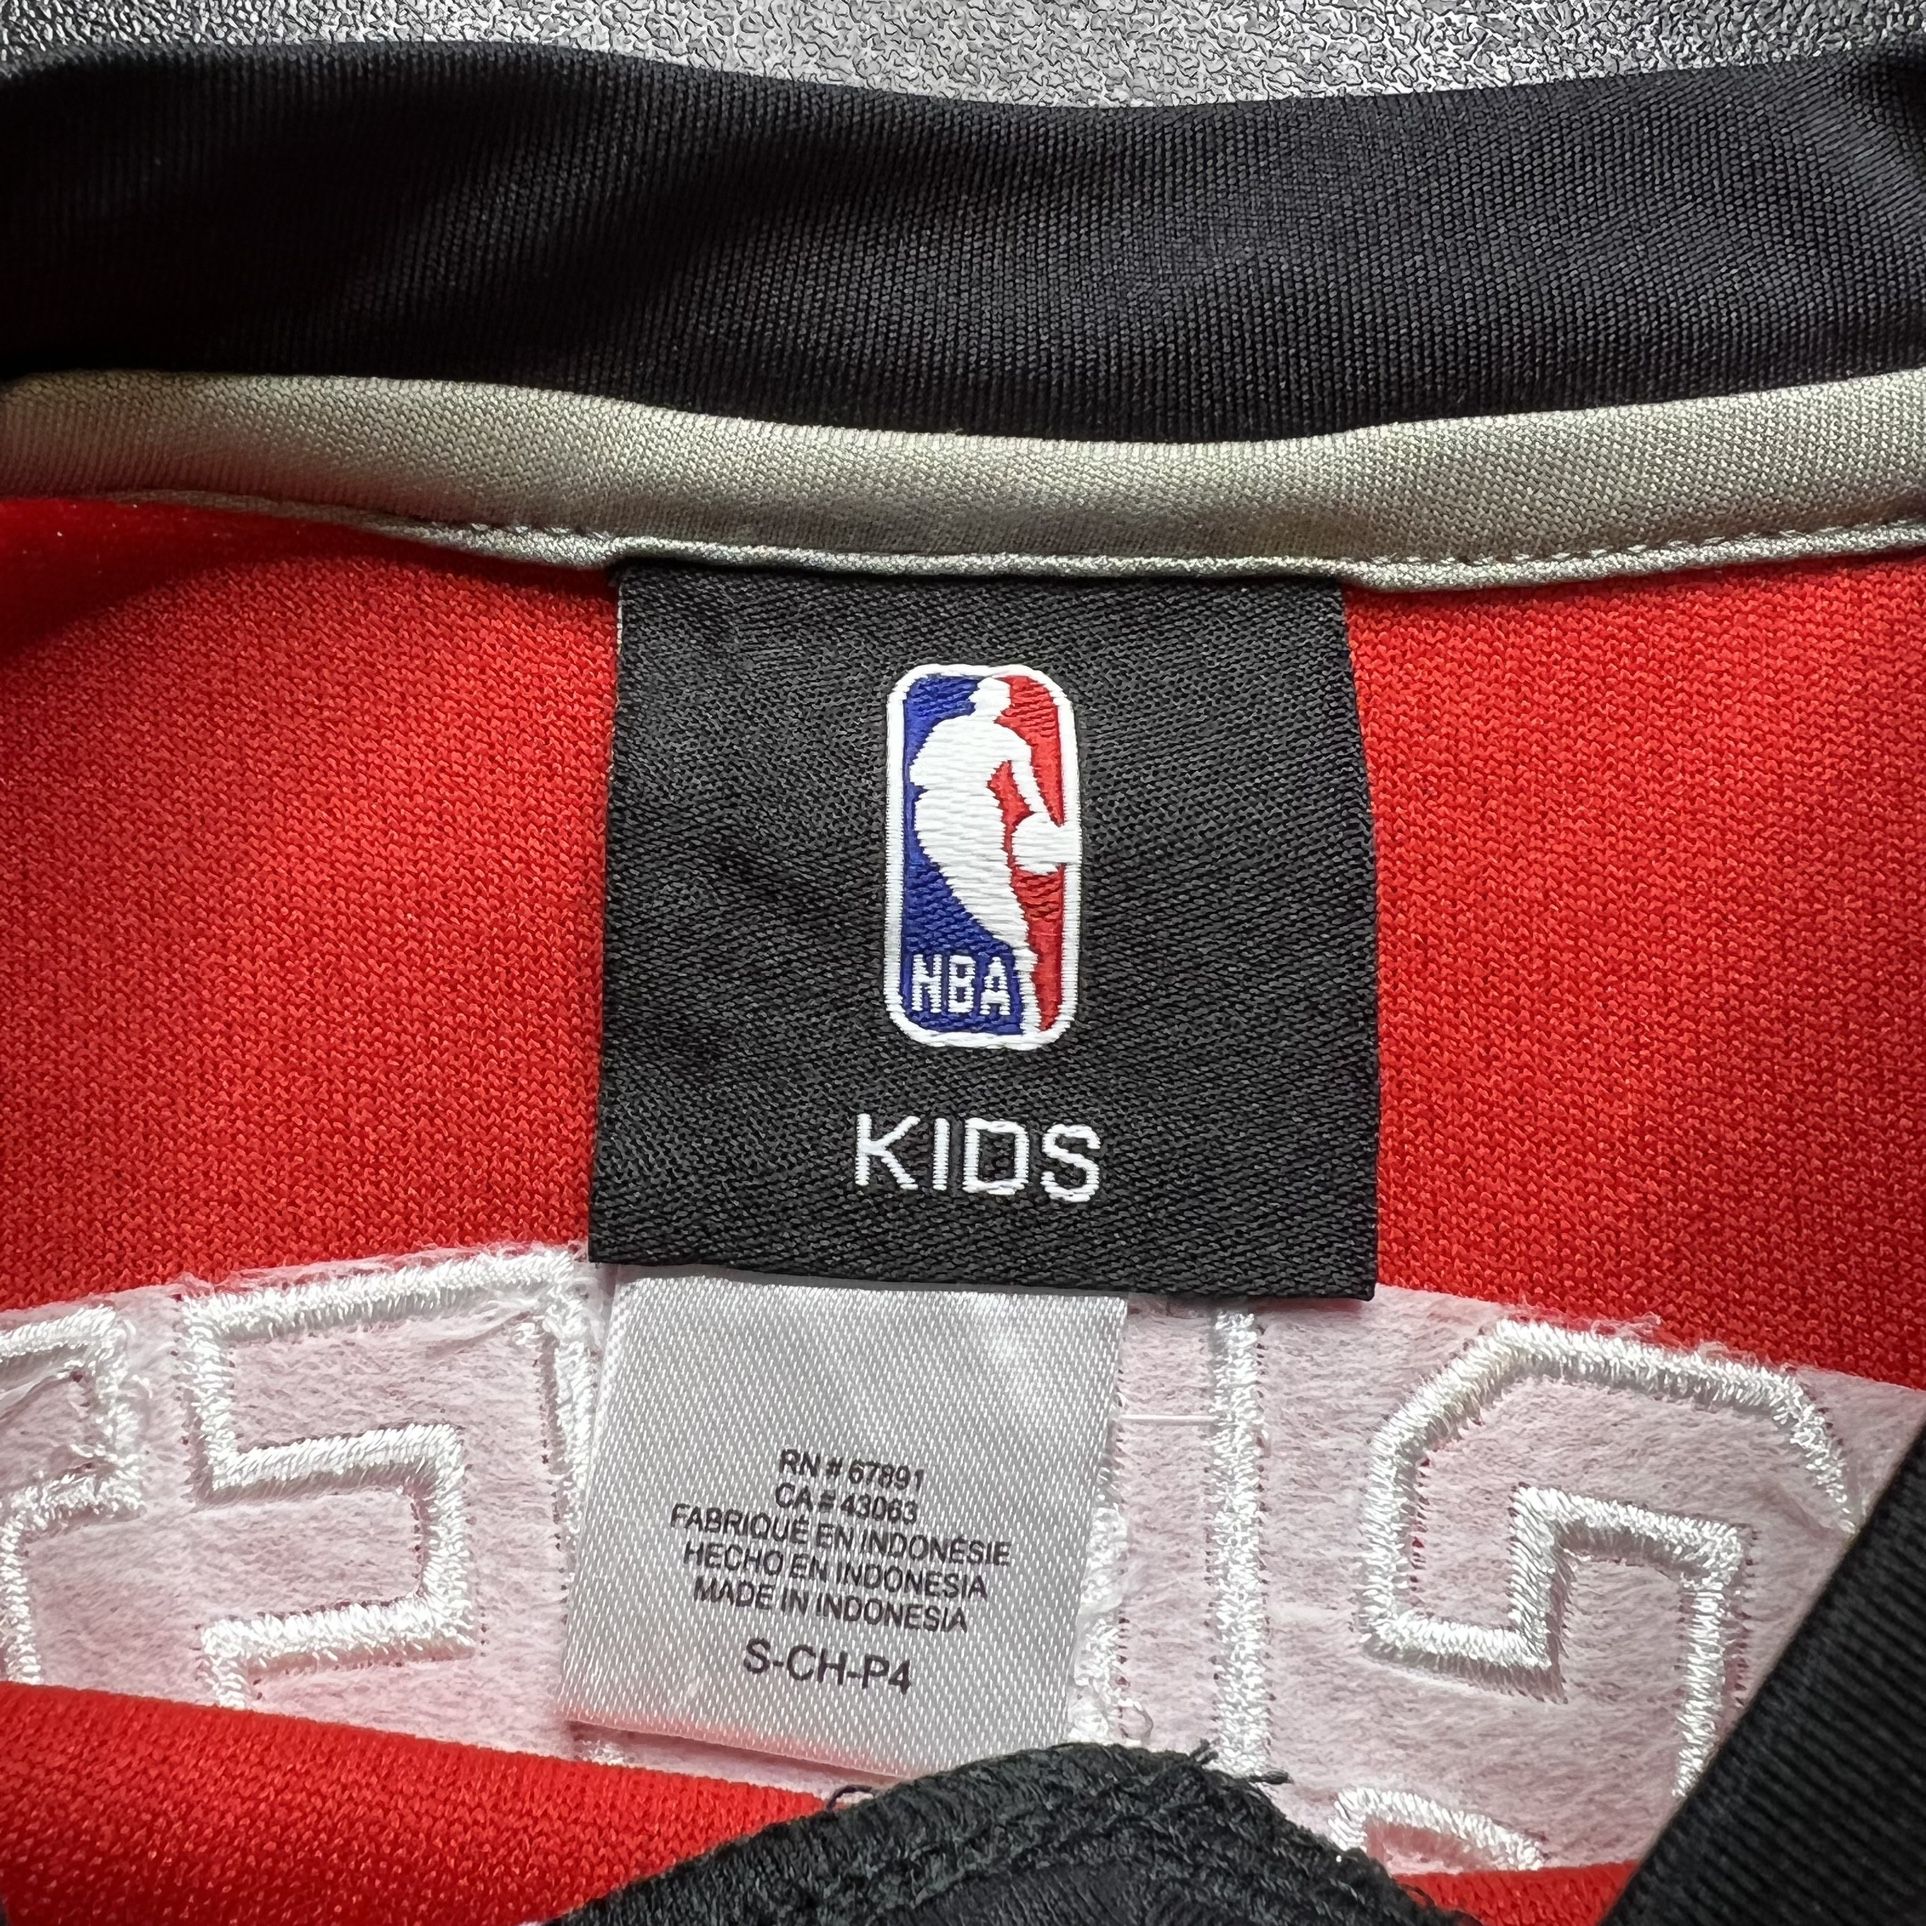 Houston Rockets NBA Basketball Jersey Warm Up Top - Kids Toddler Size Small  (4) for Sale in Katy, TX - OfferUp